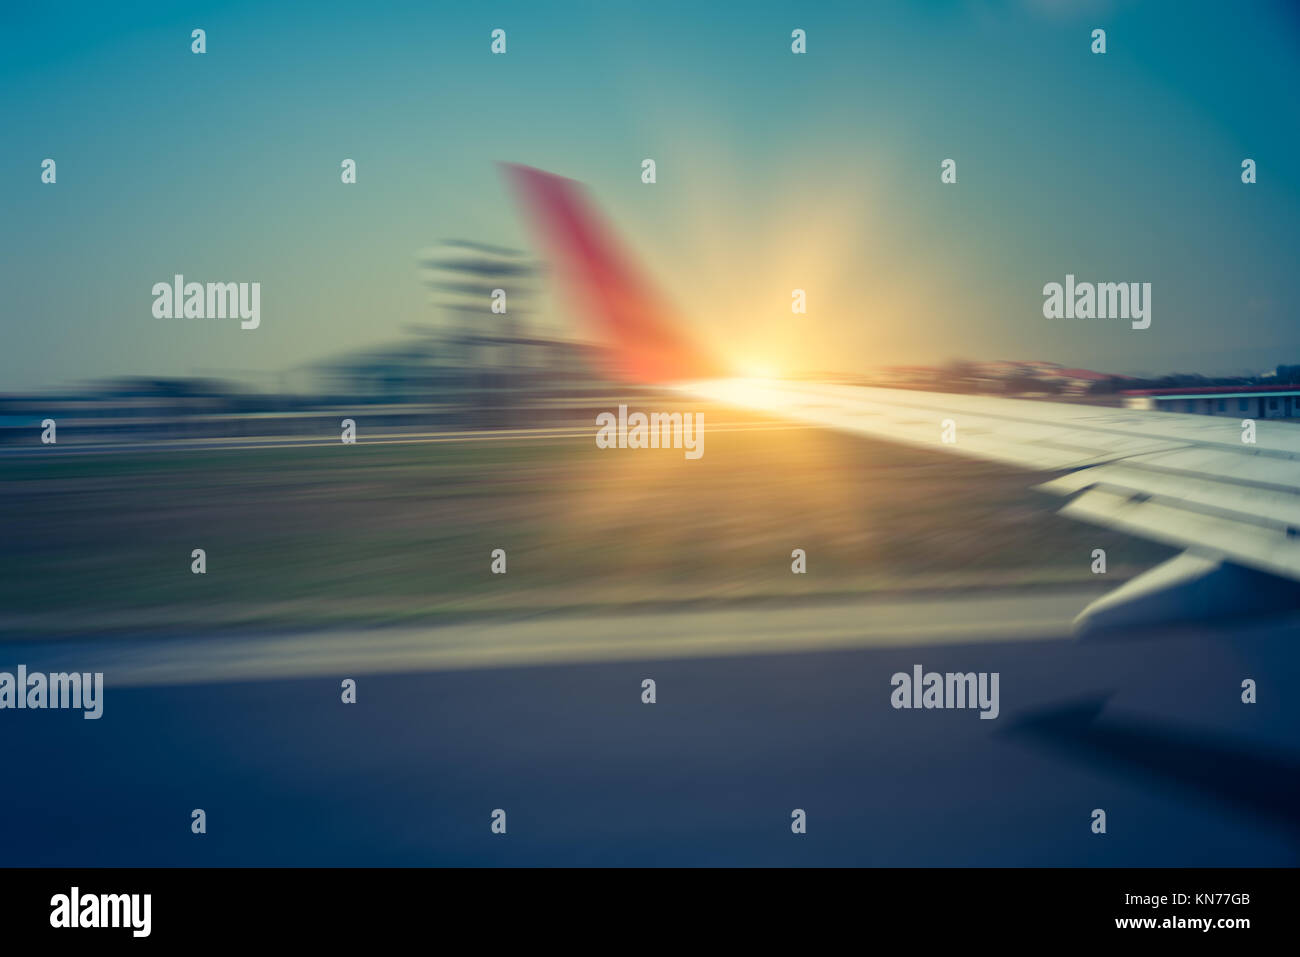 View of air plane wing during take off or landing,travel concept. Stock Photo